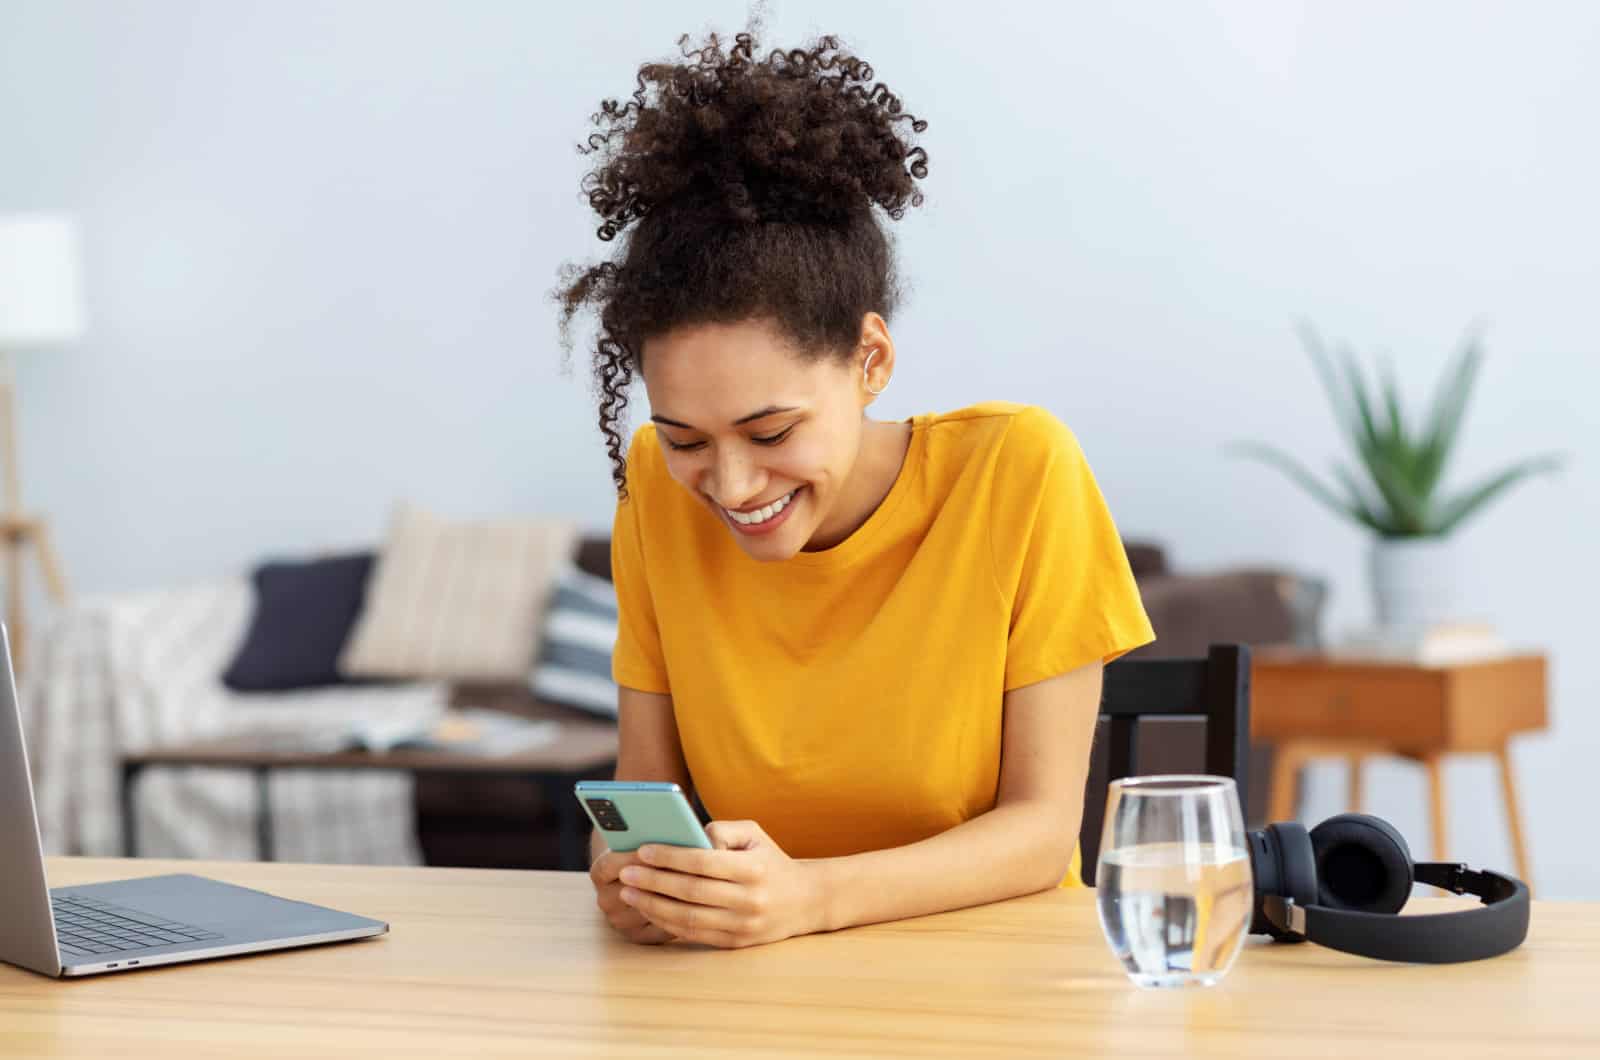 woman smiling while responding to i want you text